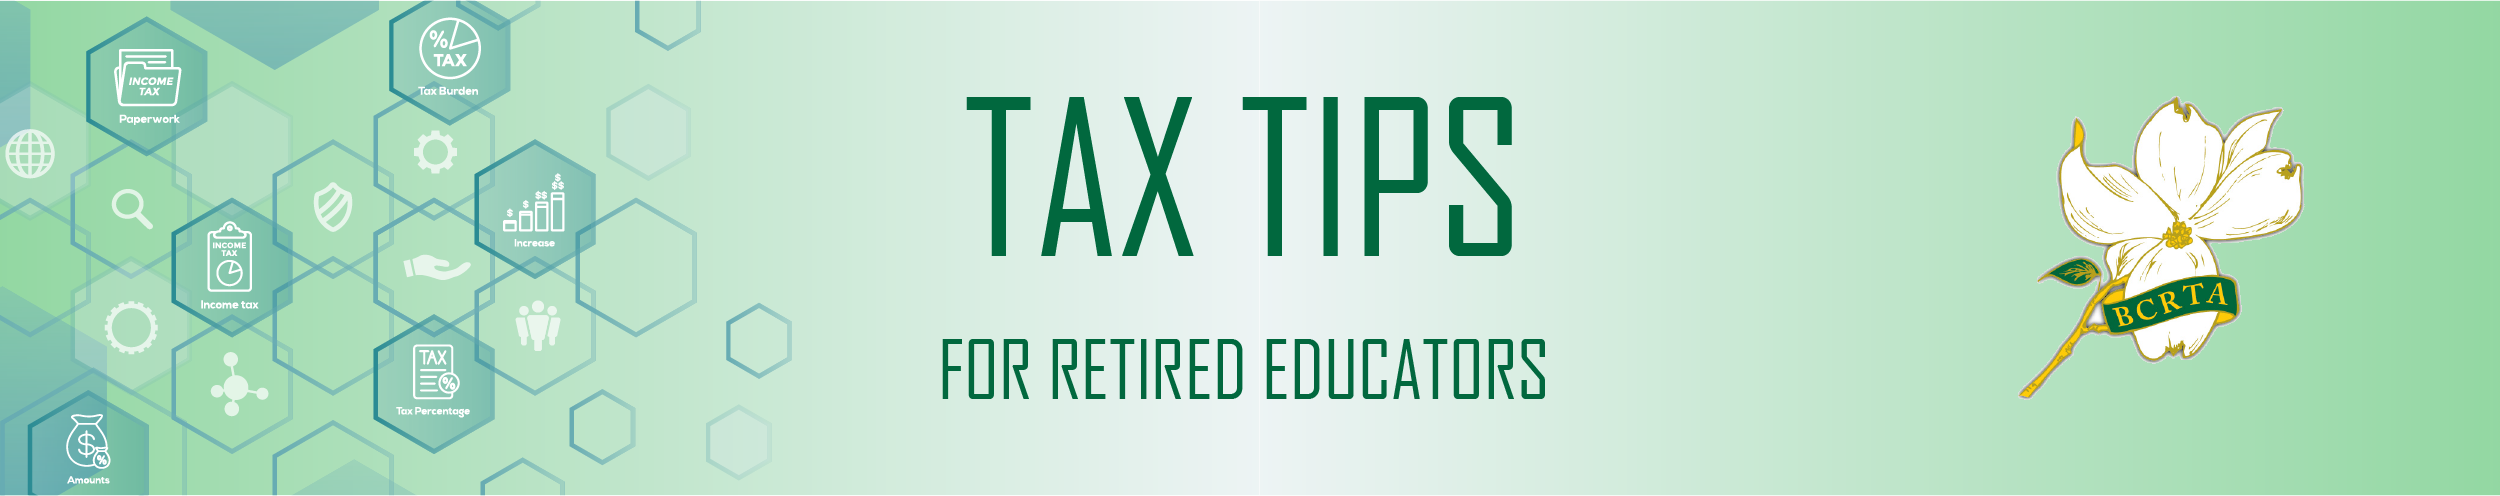 Tax Tips for Retired Educators – Updated for 2019 Tax Year